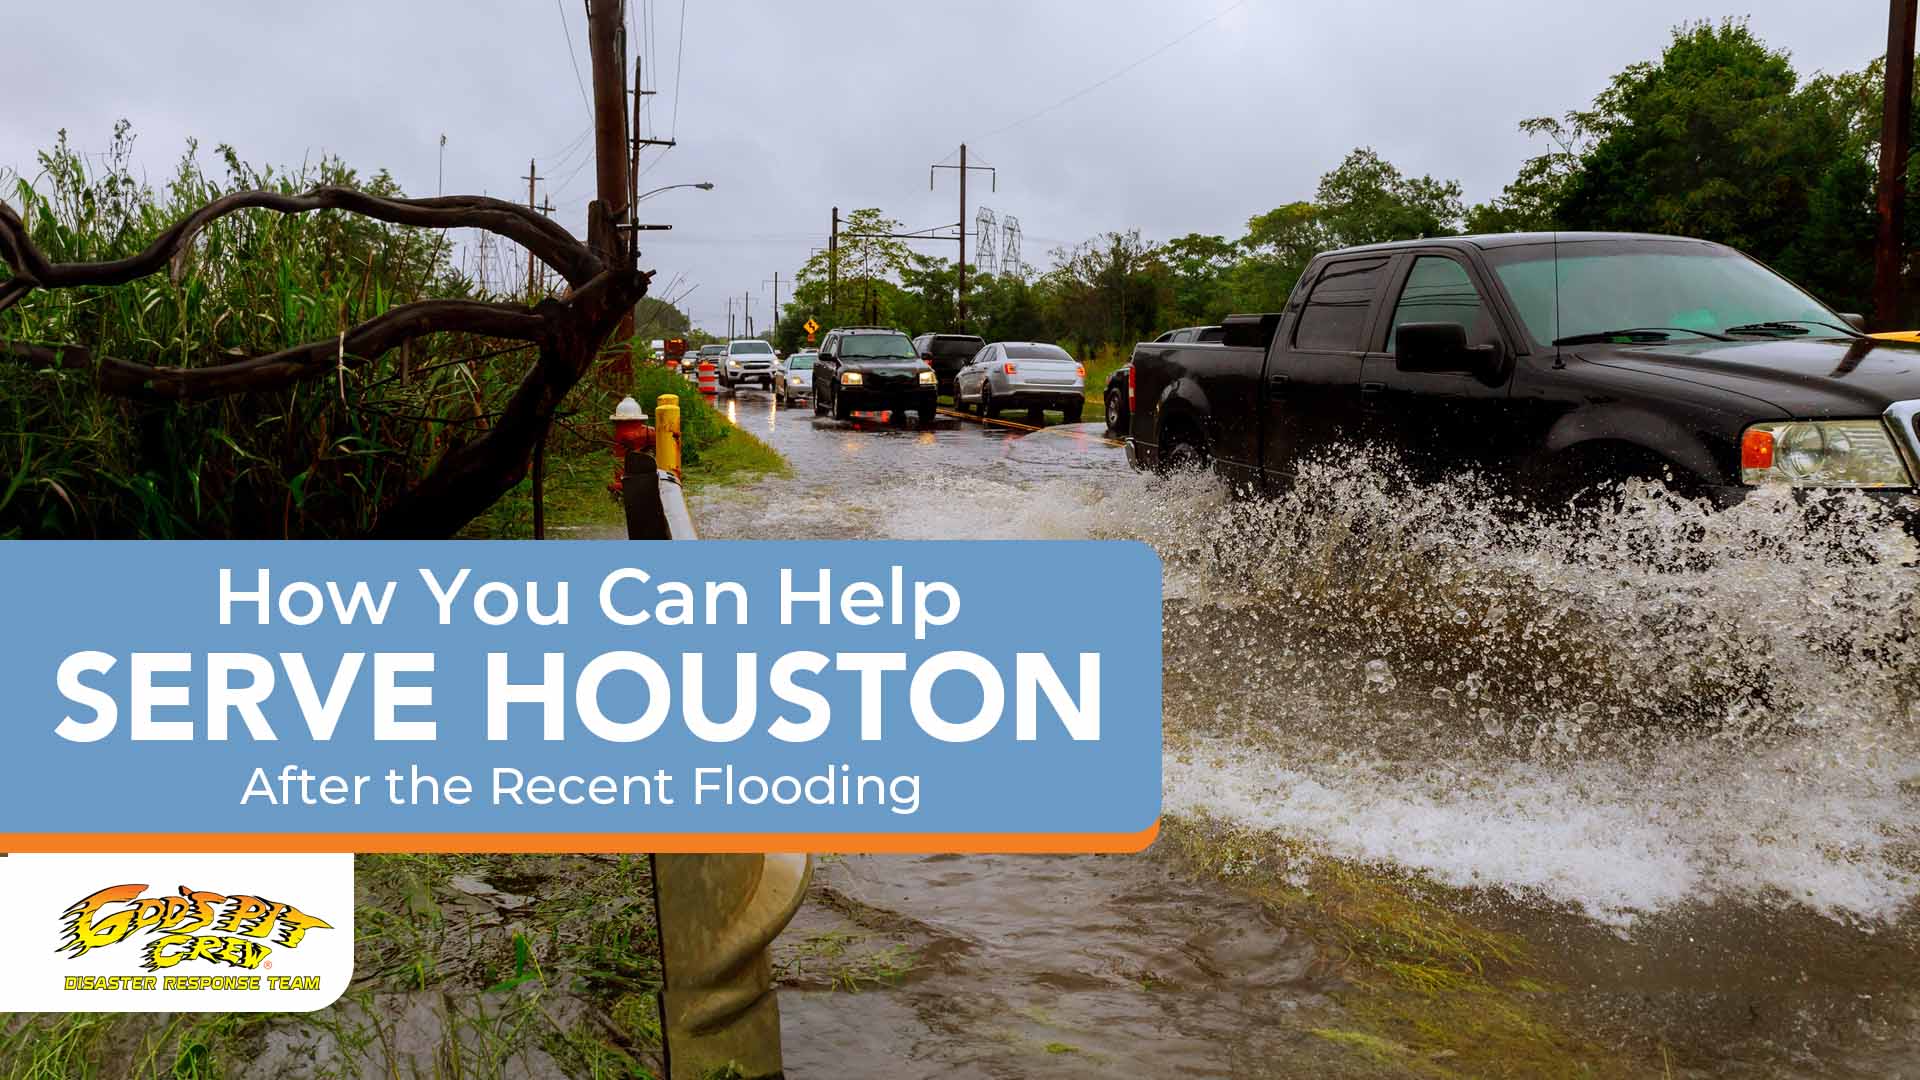 How You Can Help Serve Houston After the Floods